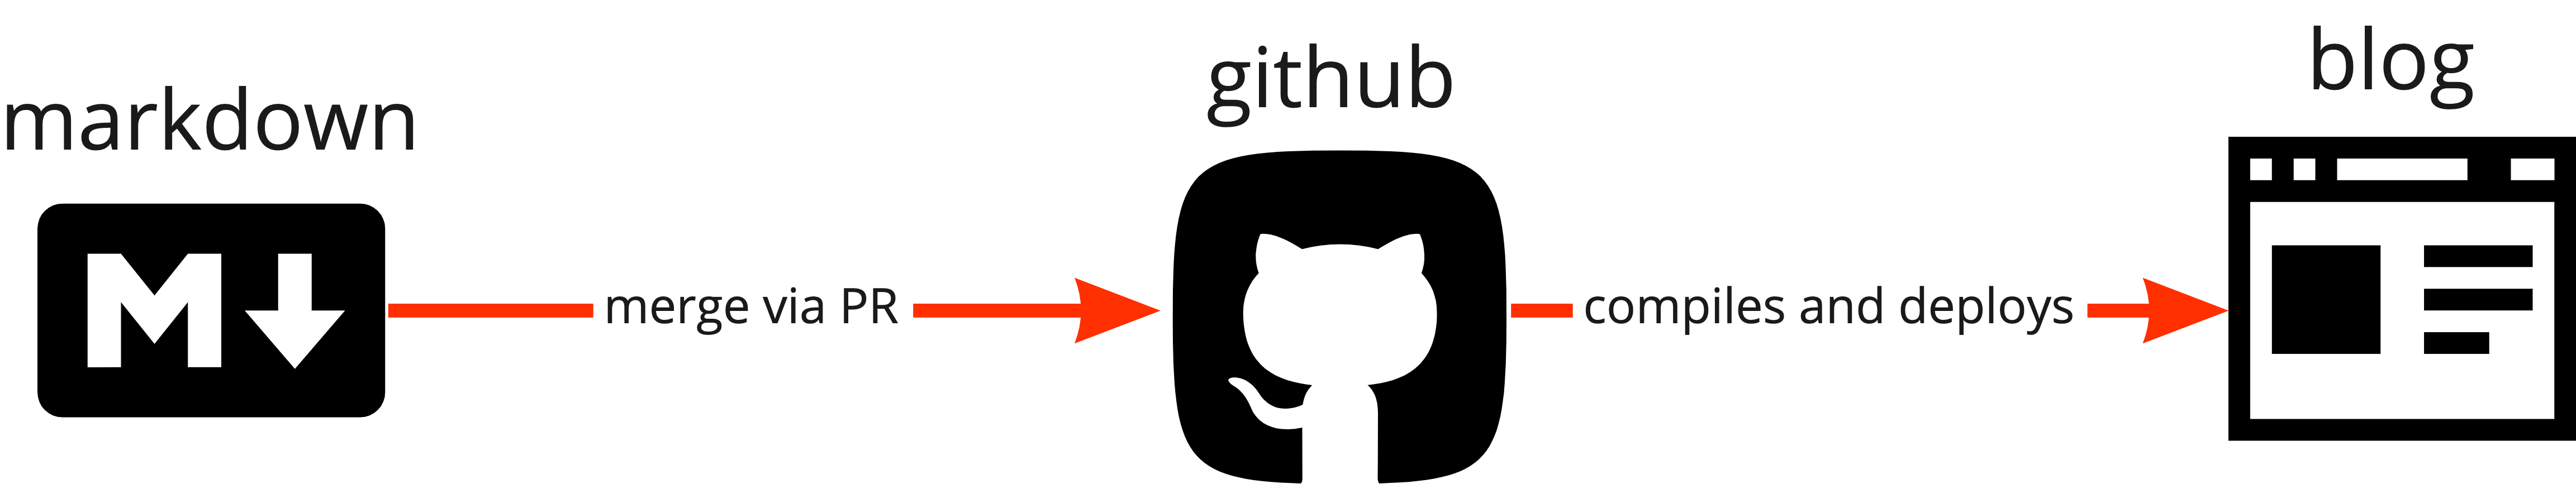 Visual representation of the development flow outlined above. A horizontal flowchart with starting with 'markdown' at the very left, an arrow pointing right to 'github', with the text 'merge via PR'. From 'github', an arrow pointing right to 'blog', with the text 'compiles and deploys'.